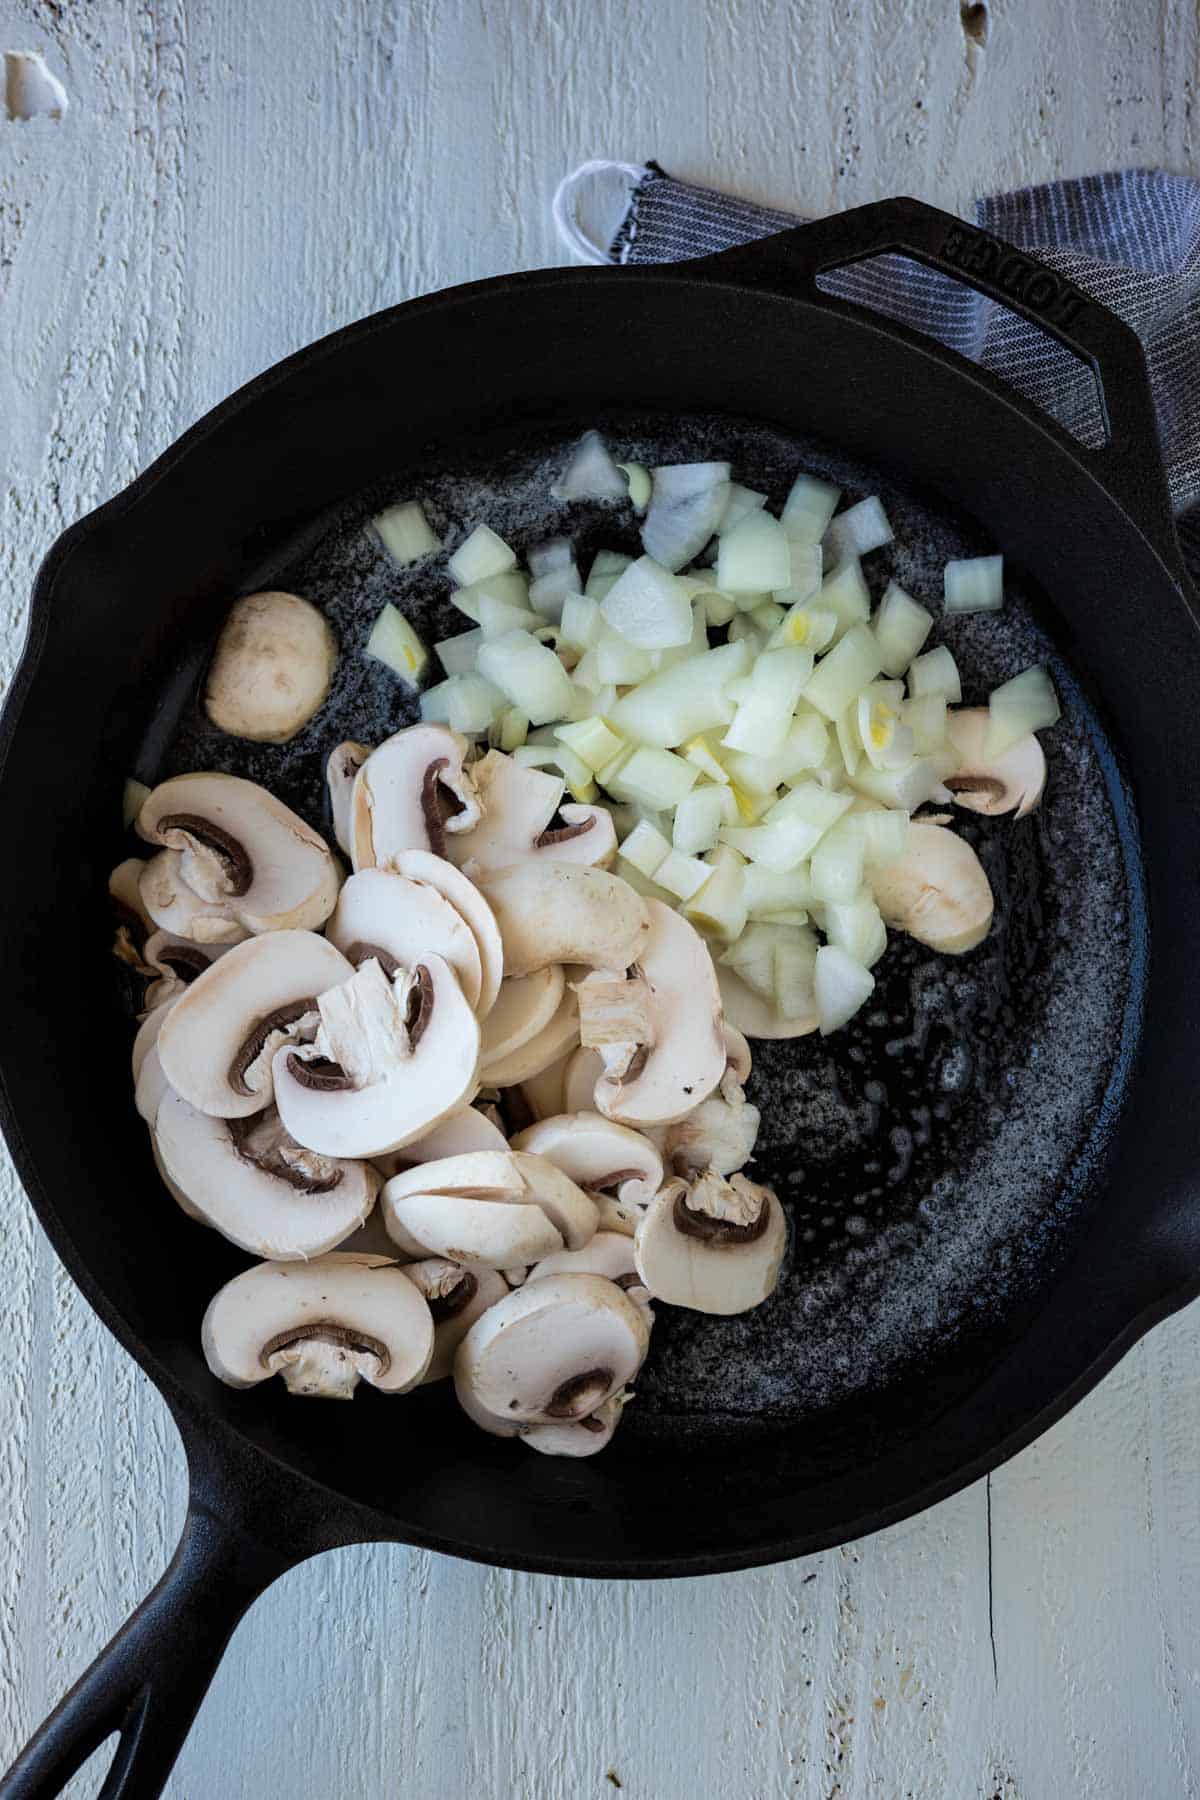 Sliced mushrooms and onions in a cast iron skillet to saute.